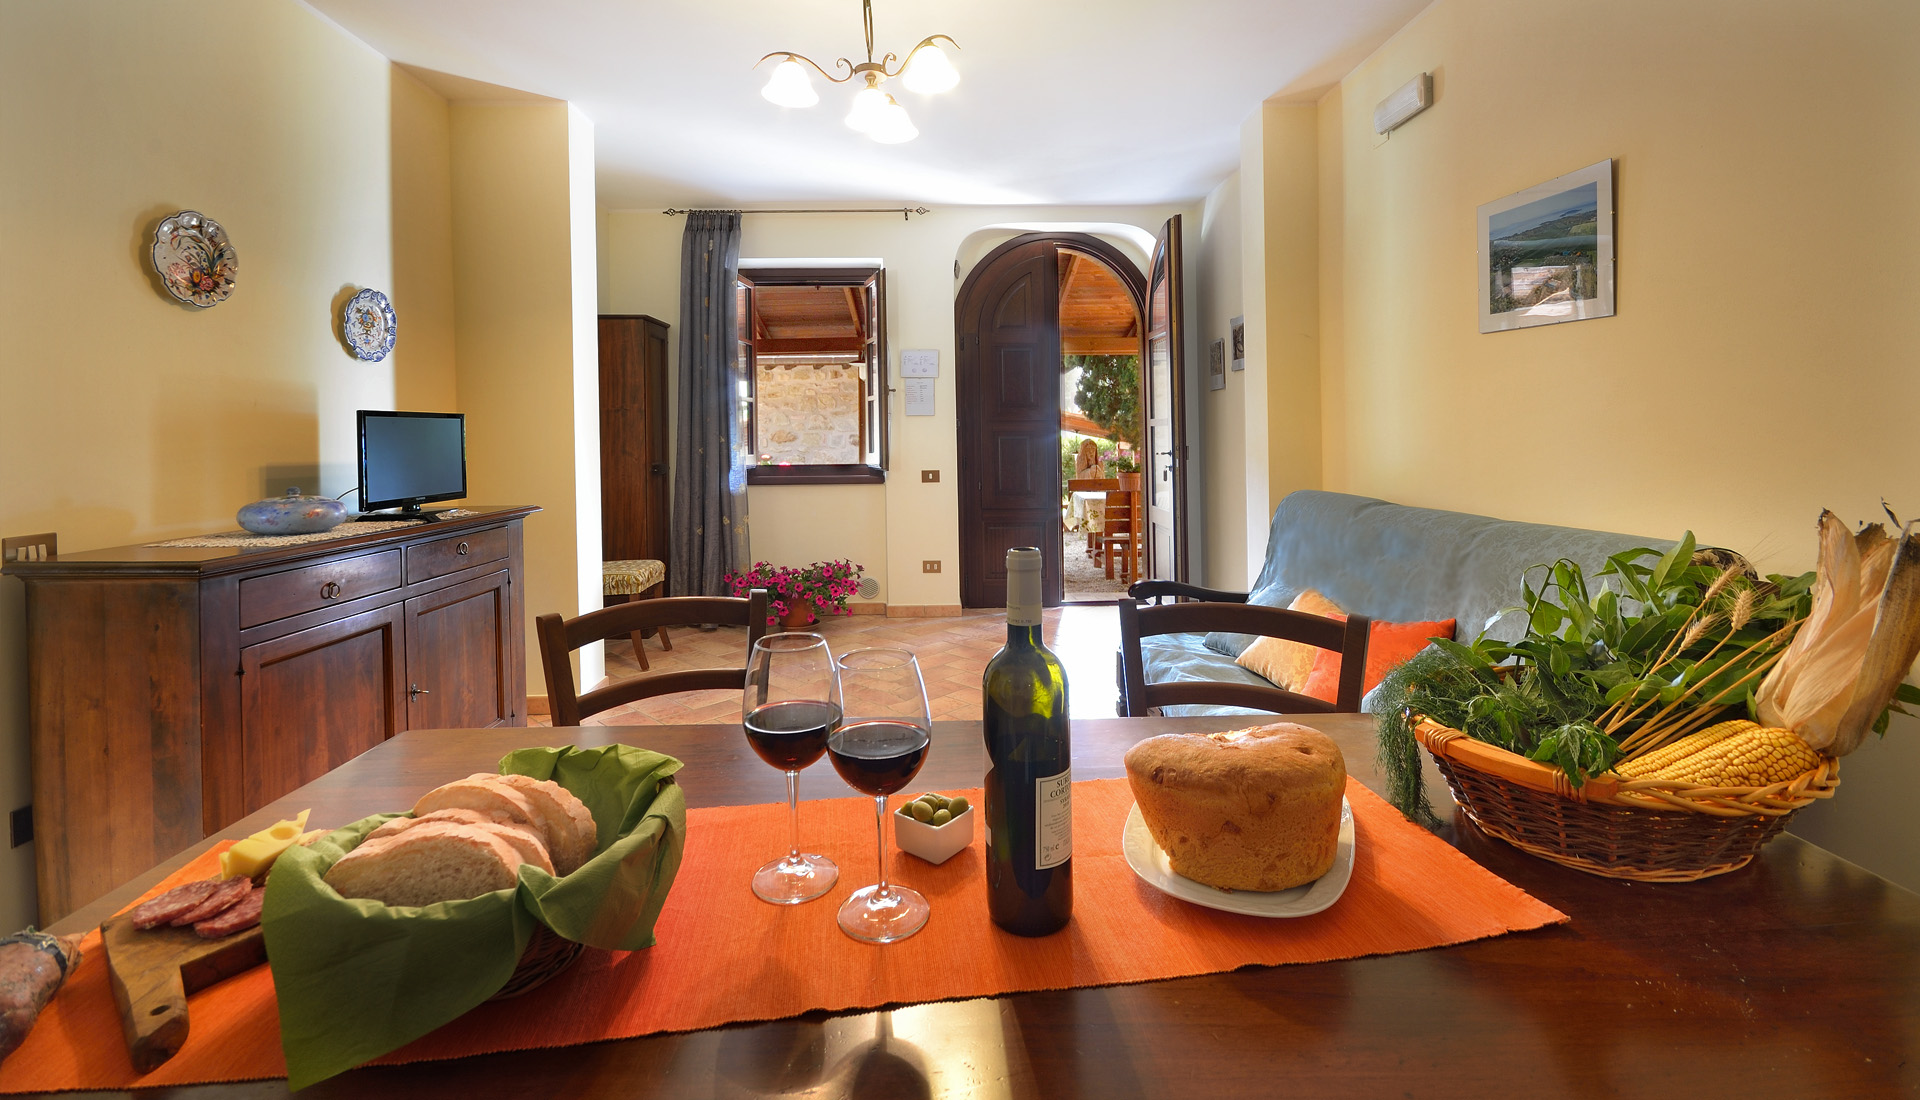 Apartments for holidays - Umbria Italy